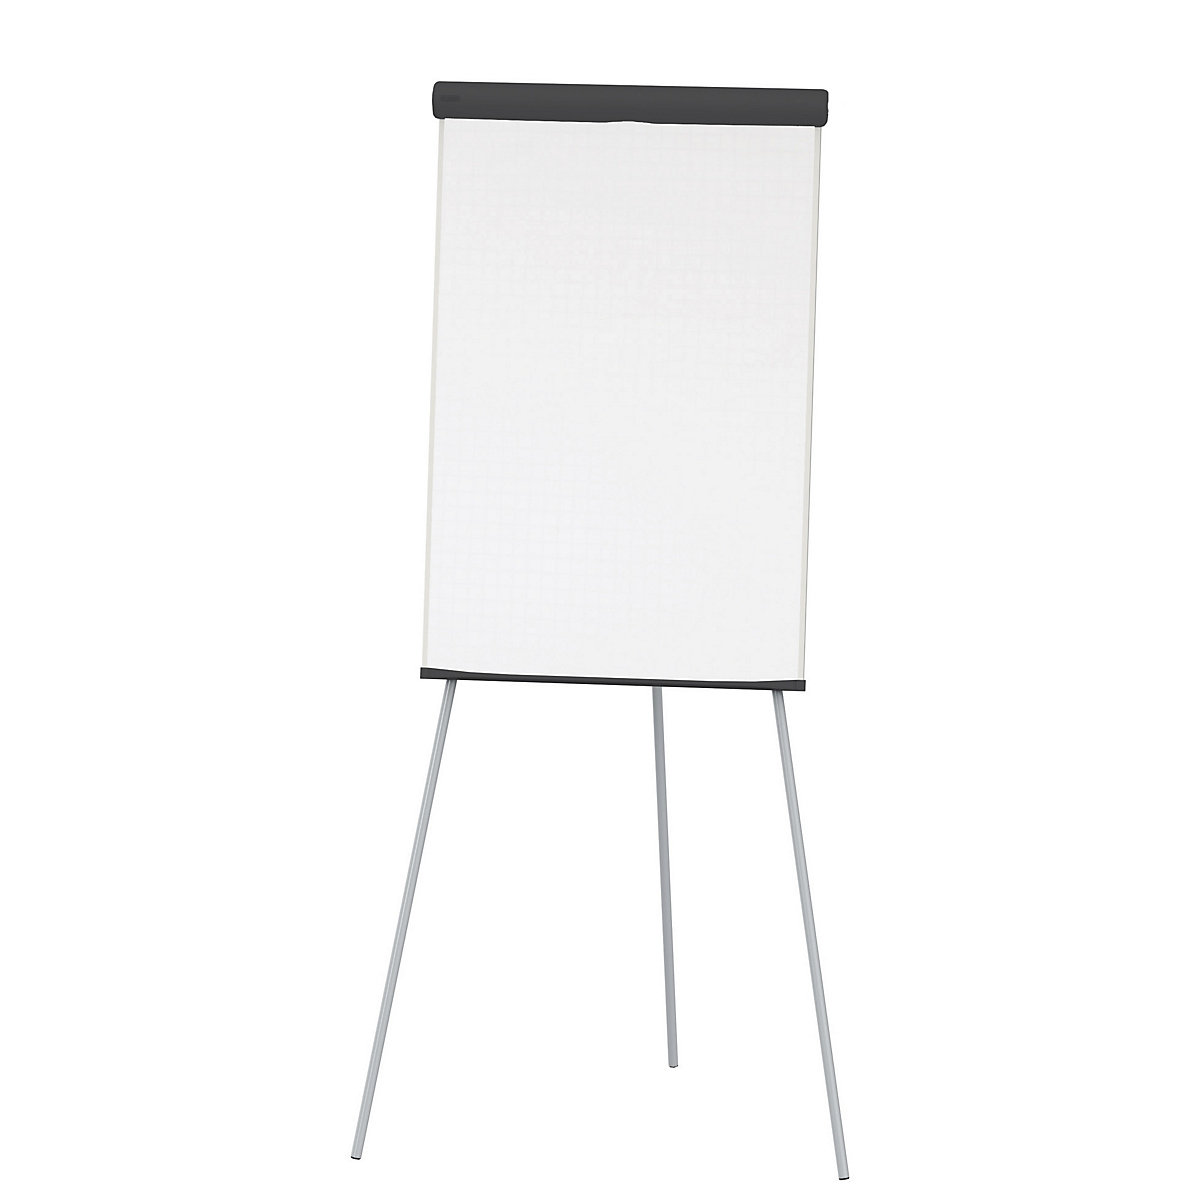 Flipchart, three legged – MAUL: height 1860 mm, without paper holder